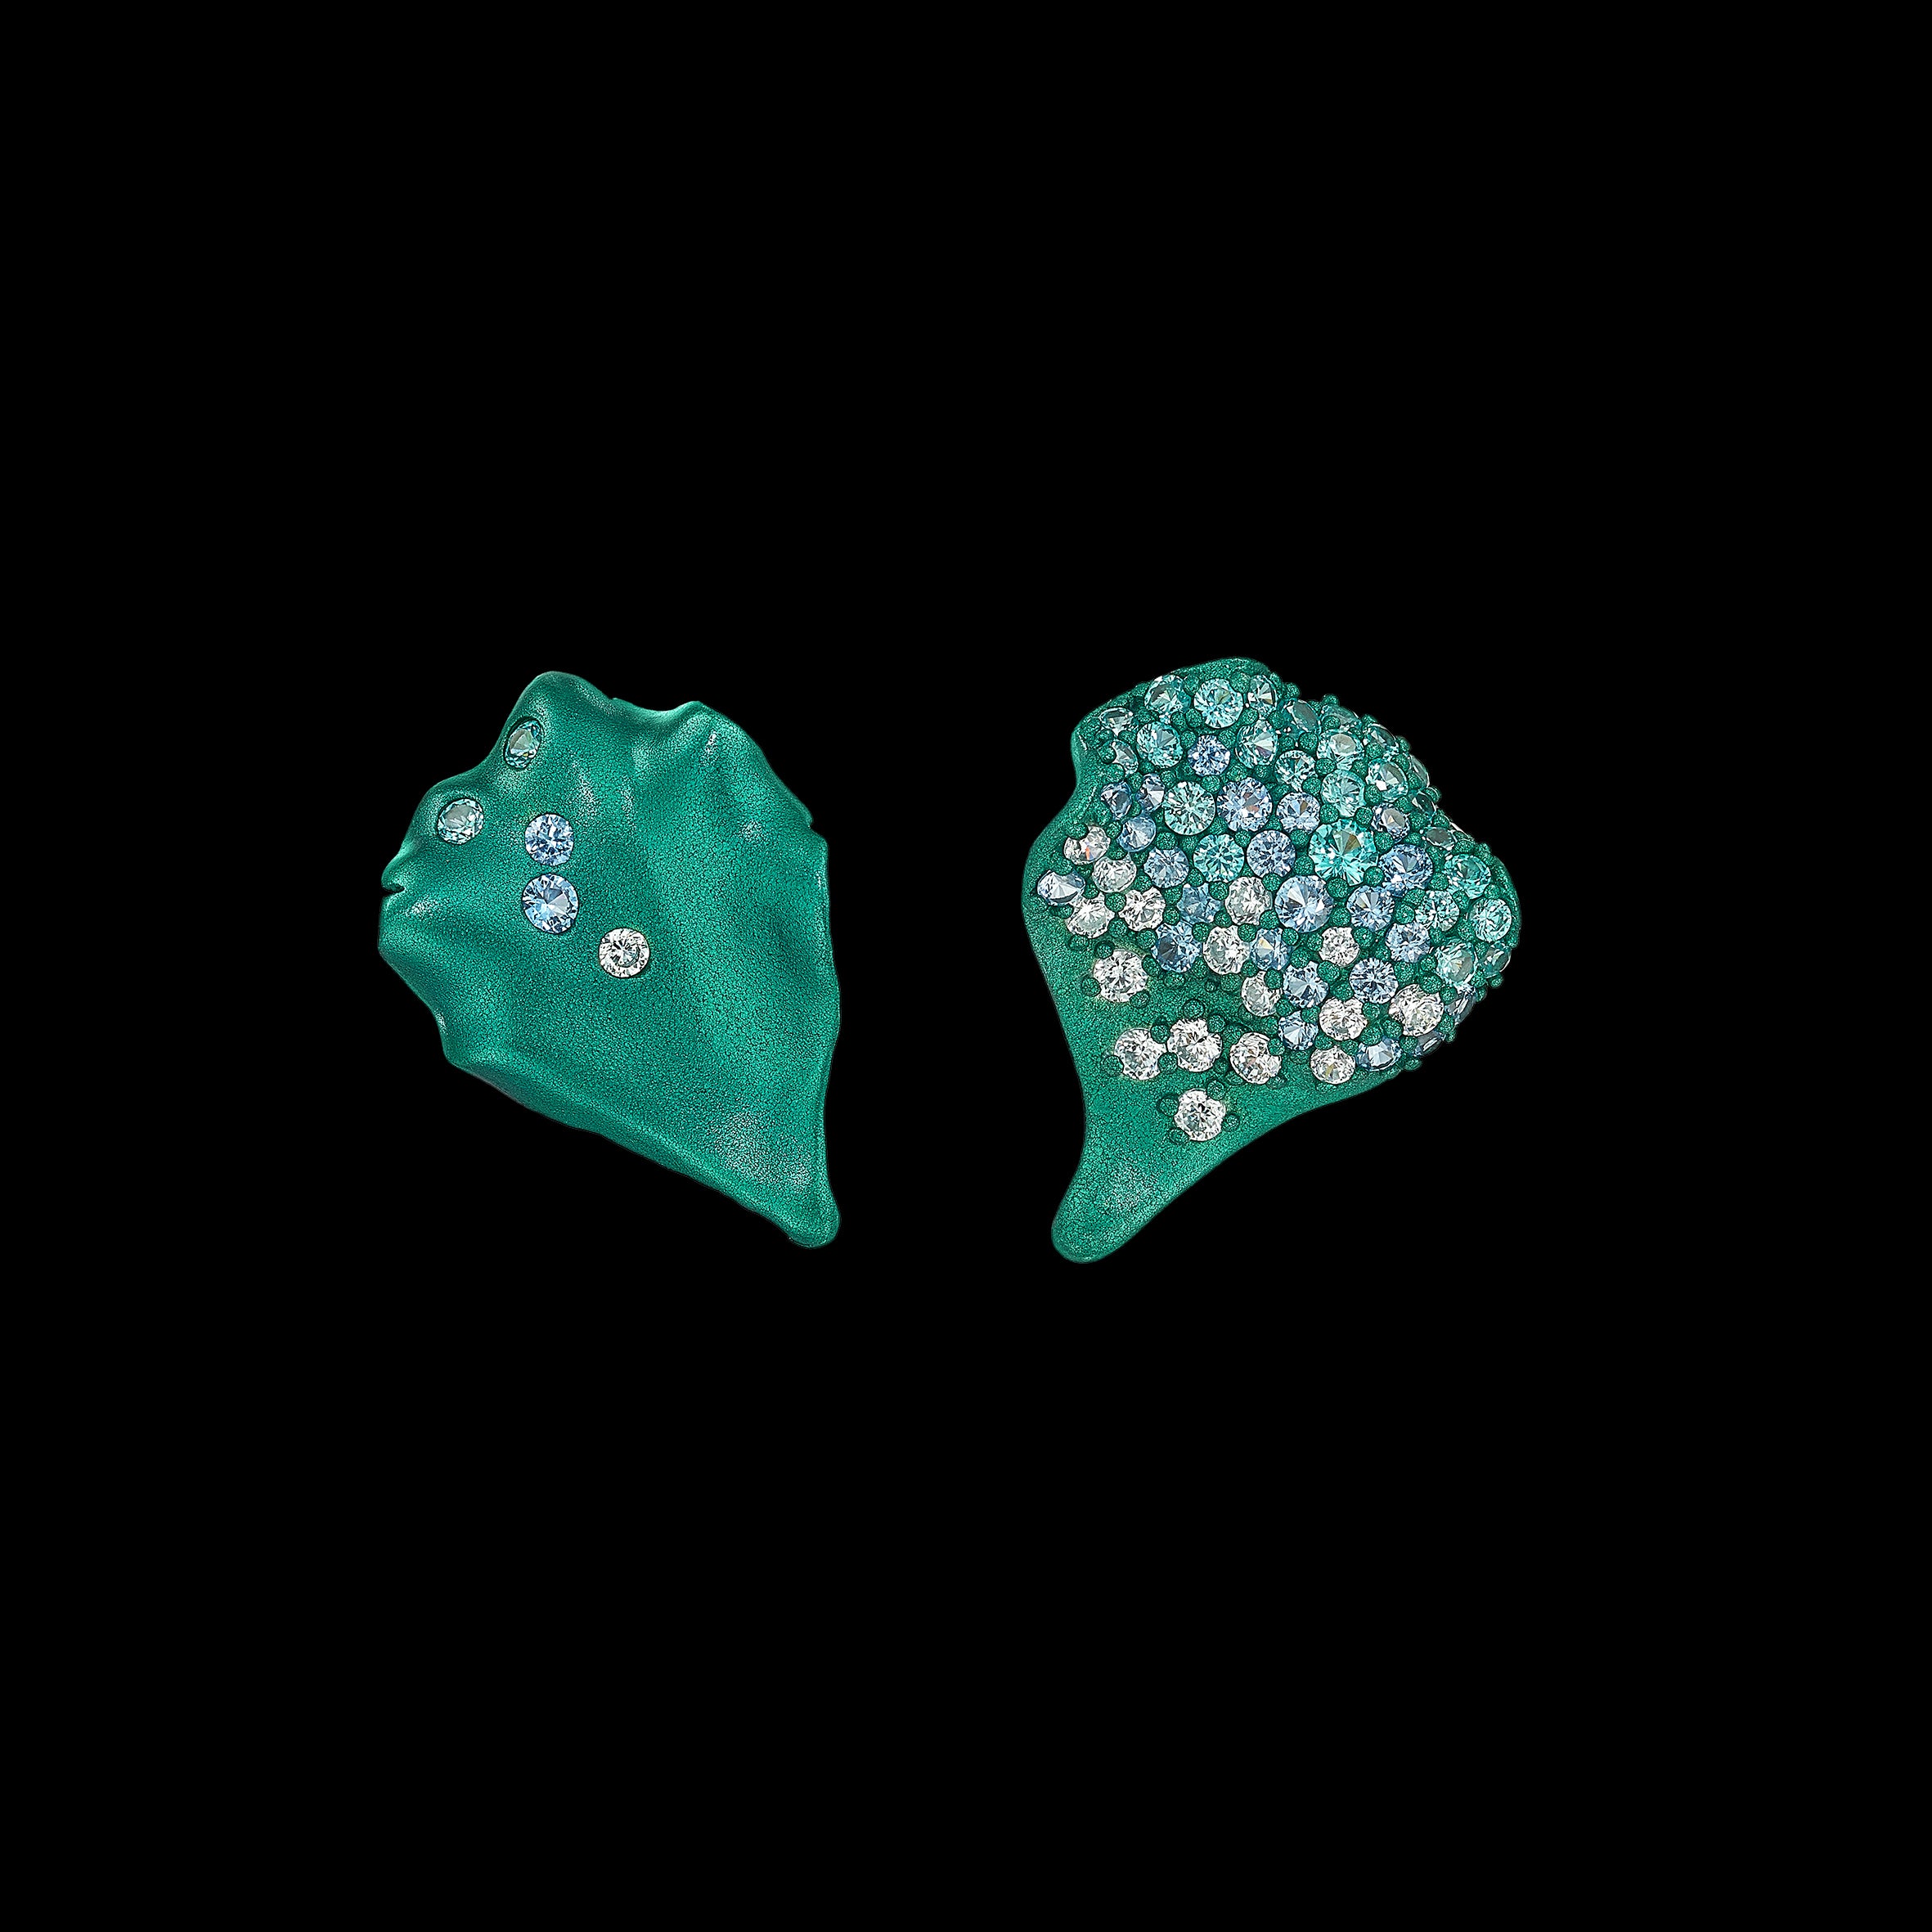 Paraiba Petal Studs, Earrings, Anabela Chan Joaillerie - Fine jewelry with laboratory grown and created gemstones hand-crafted in the United Kingdom. Anabela Chan Joaillerie is the first fine jewellery brand in the world to champion laboratory-grown and created gemstones with high jewellery design, artisanal craftsmanship and a focus on ethical and sustainable innovations.